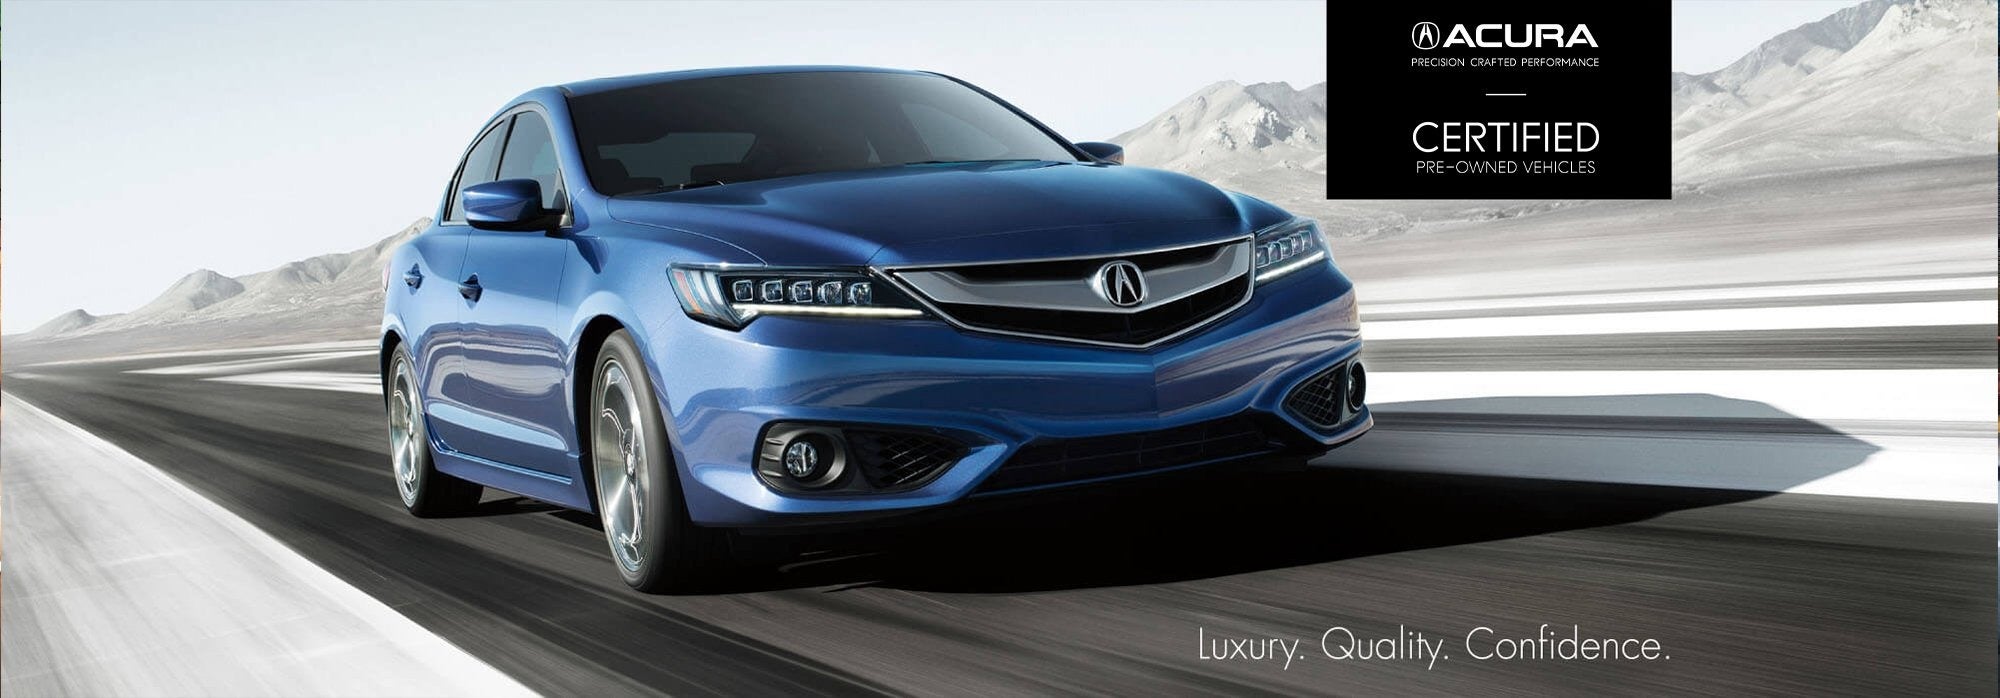 banner image of Acura CPO benefits